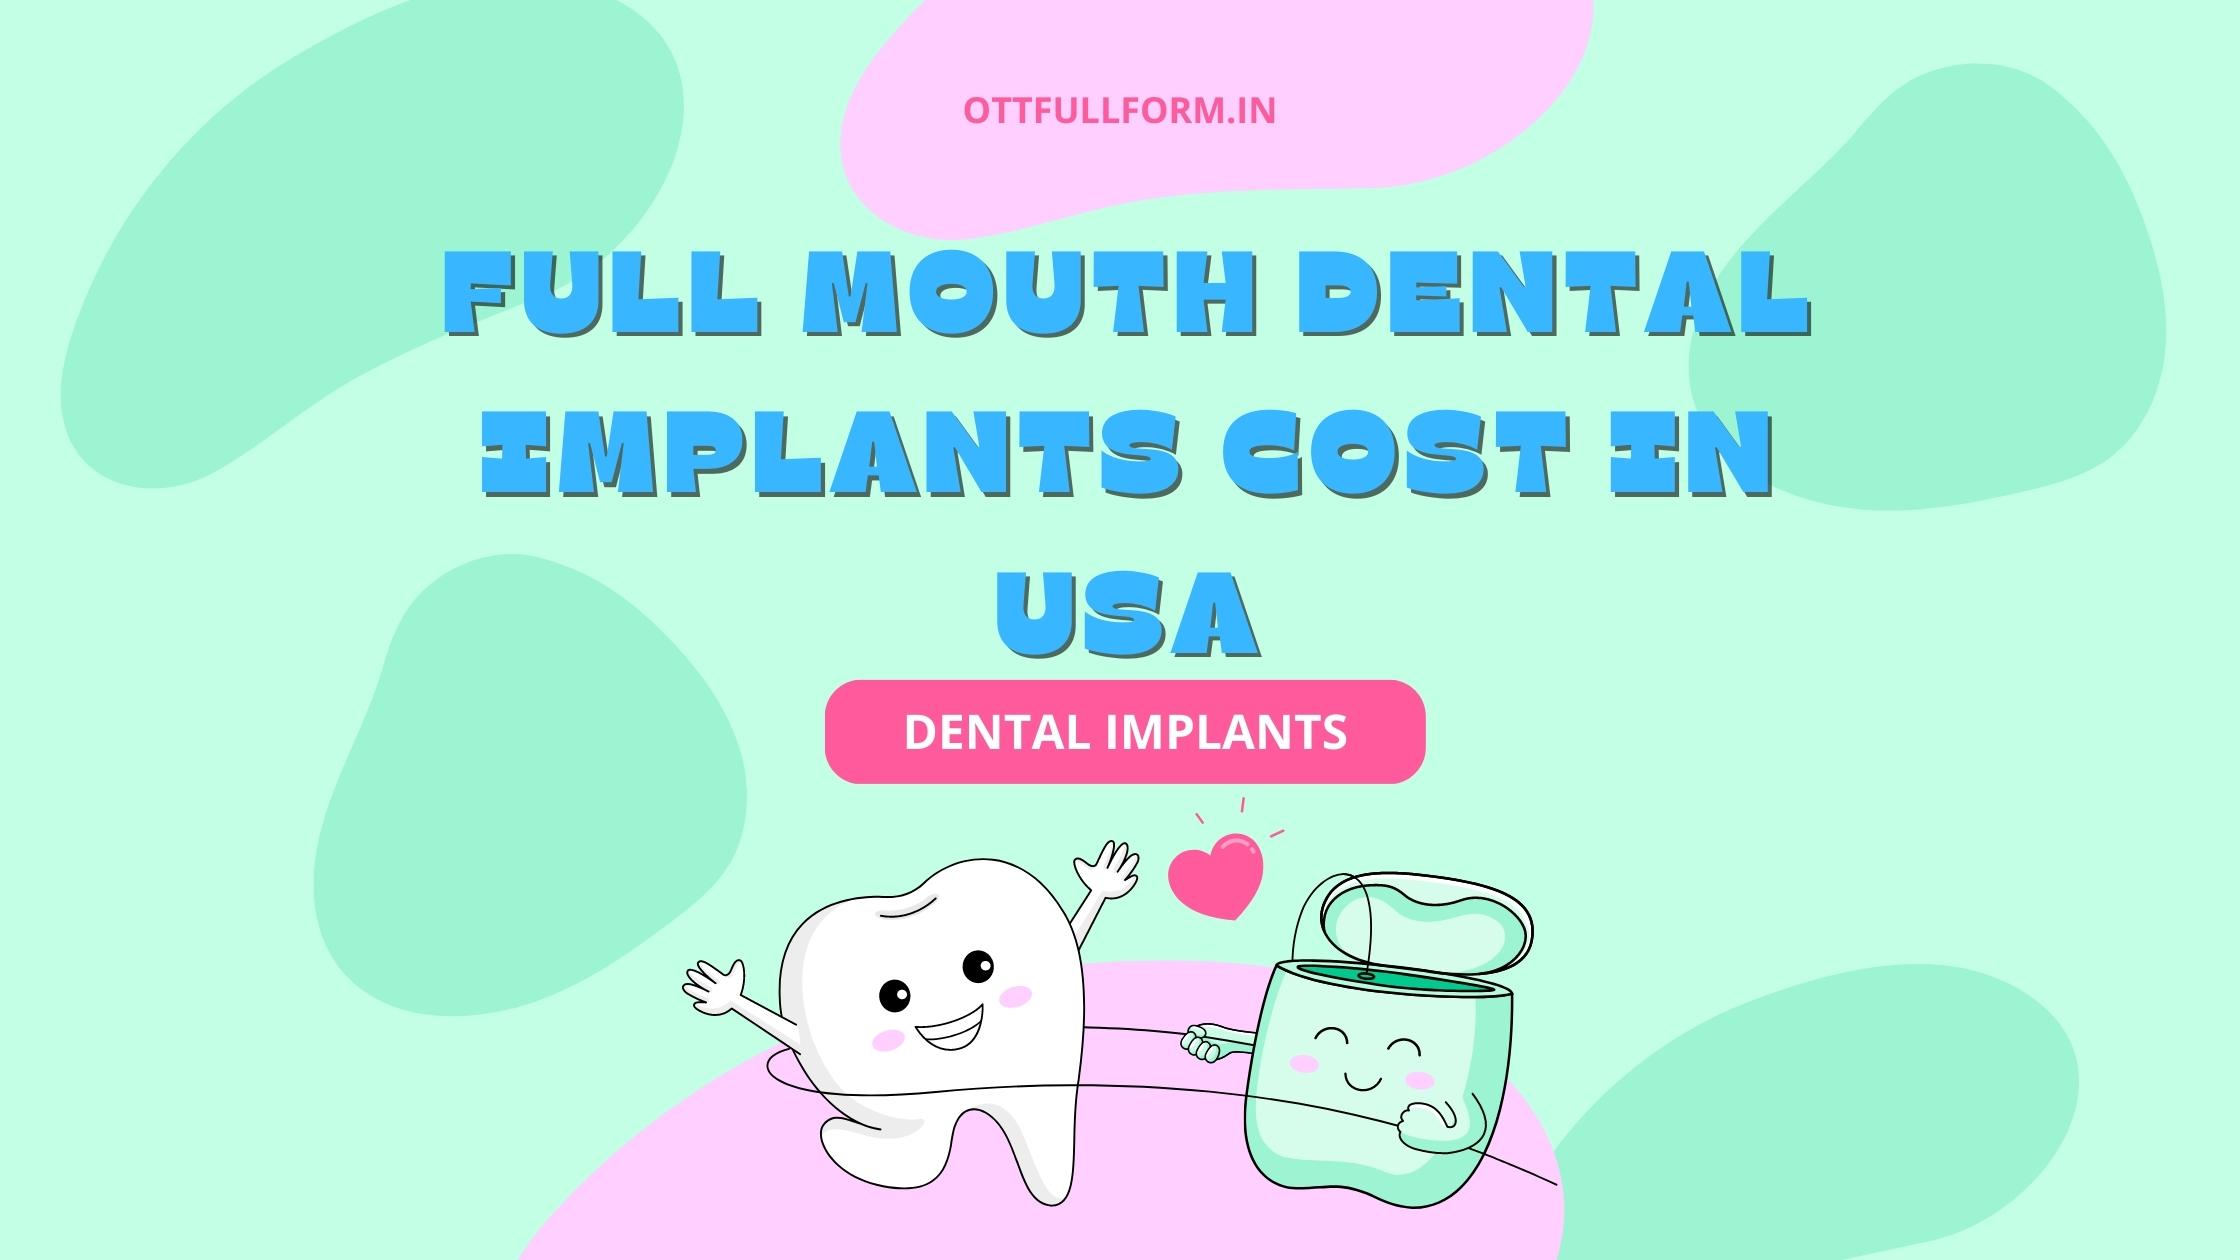 The Full Mouth Dental Implants Cost in USA